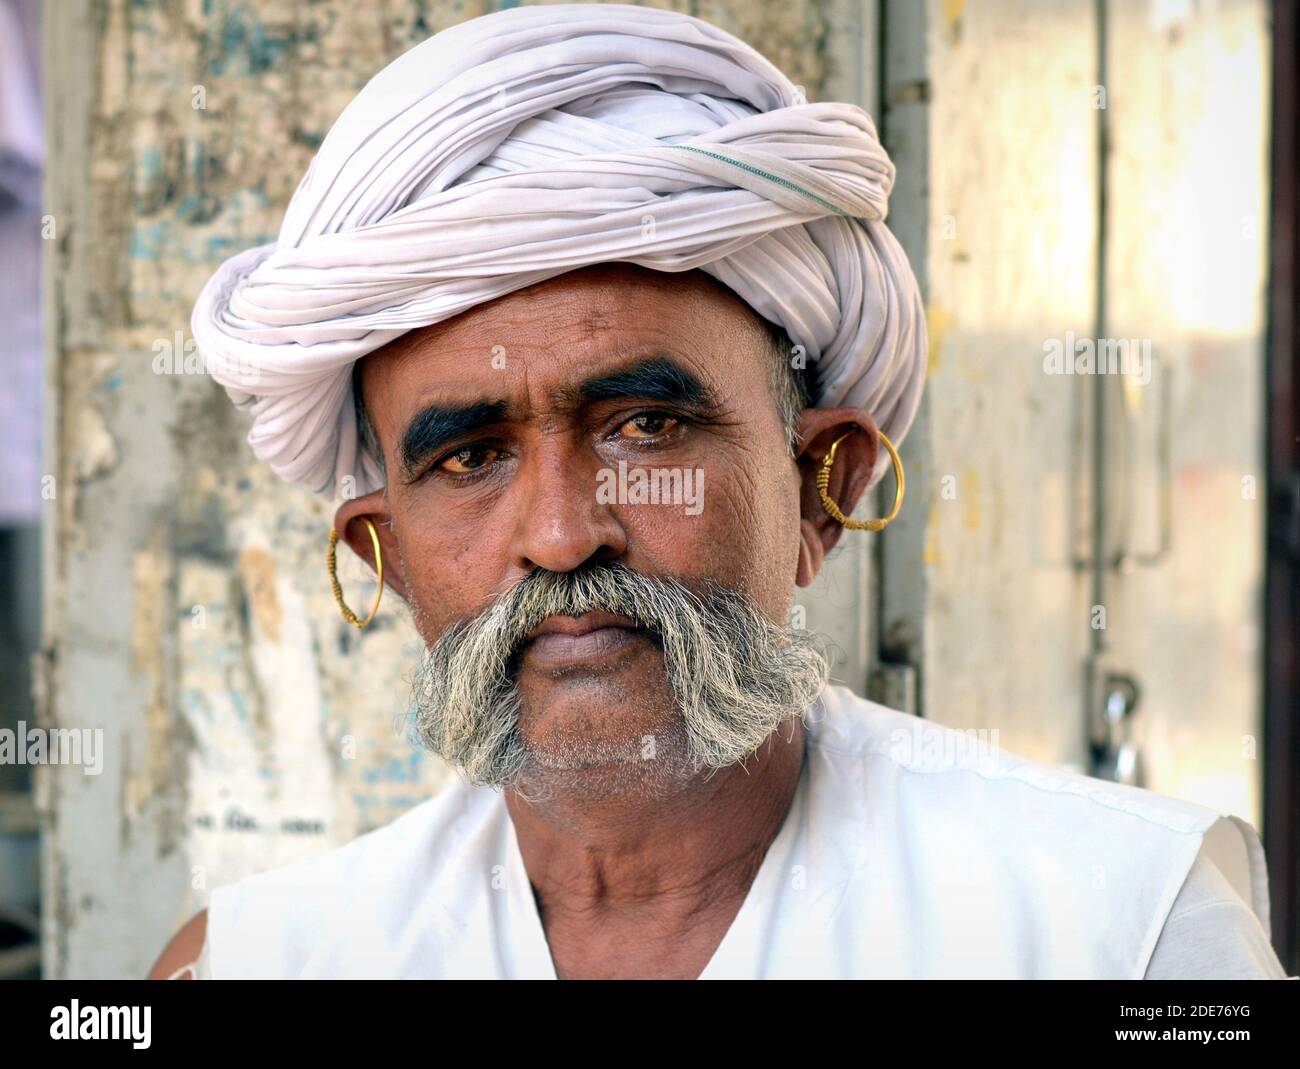 Handsome middle aged Indian Rabari shepherd man with golden tribal earrings wears a white turban and large friendly mutton chops (moustache). Stock Photo